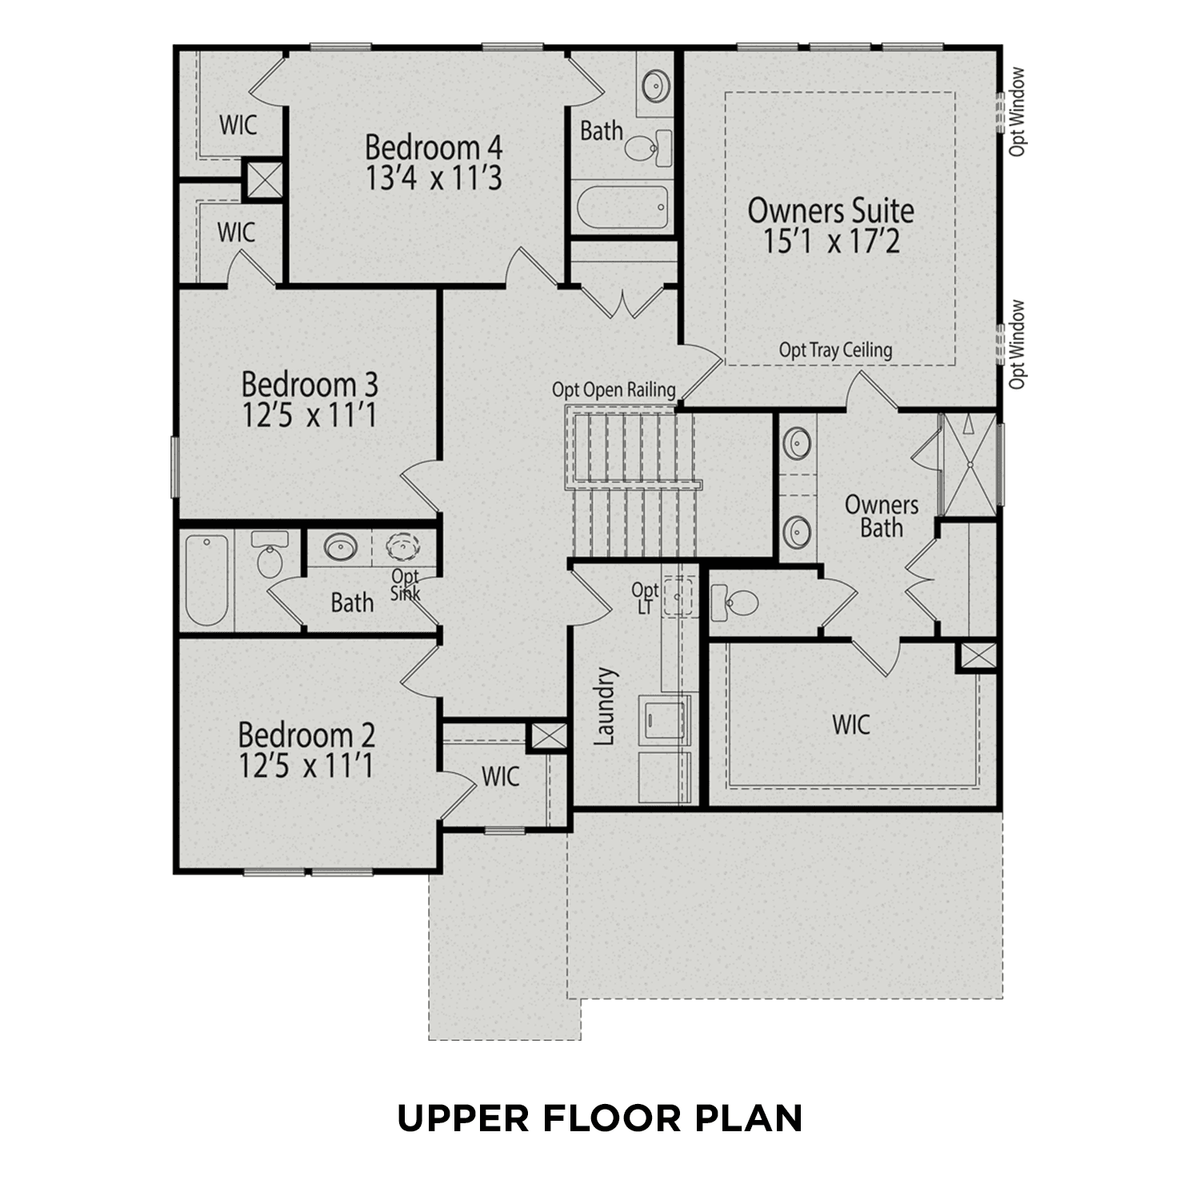 2 - The Hickory floor plan layout for 85 Noble Heart Lane in Davidson Homes' Prince Place community.